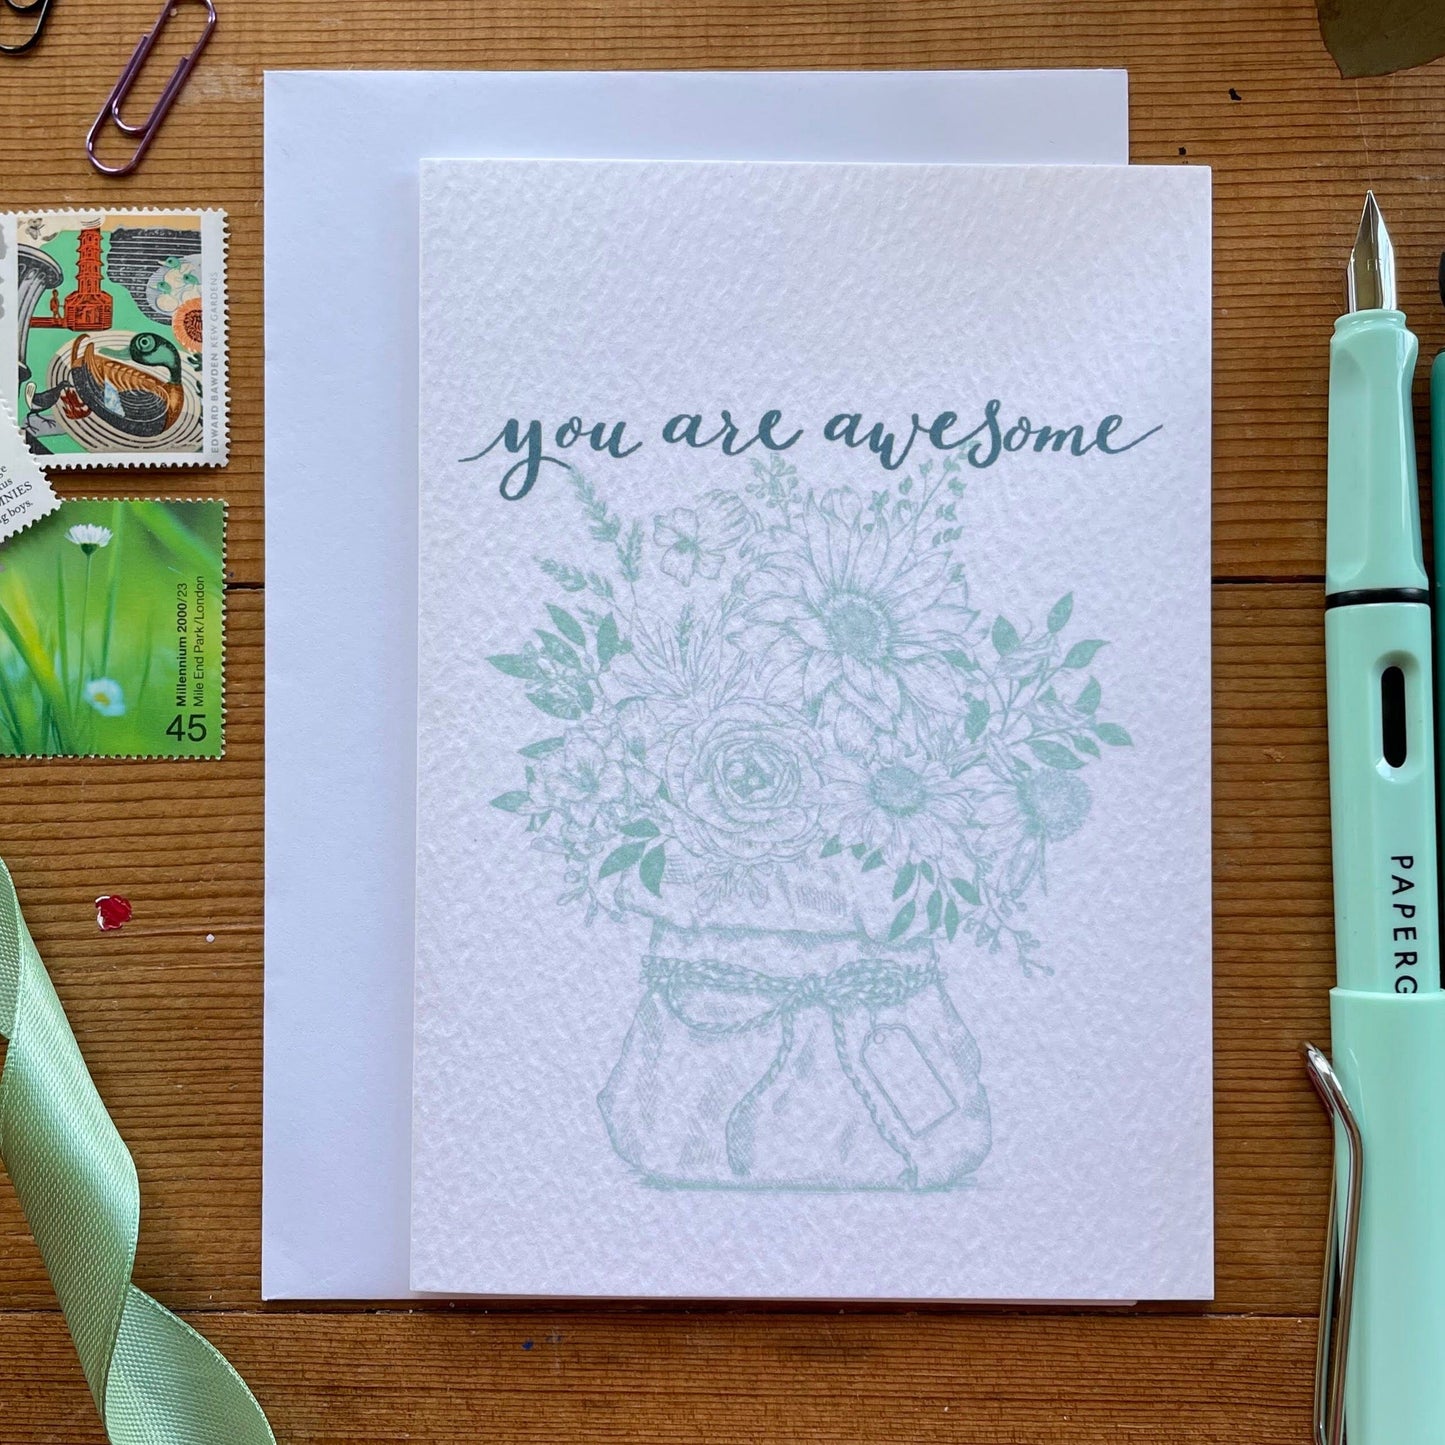 And Hope Designs Greeting & Note Cards You are awesome card